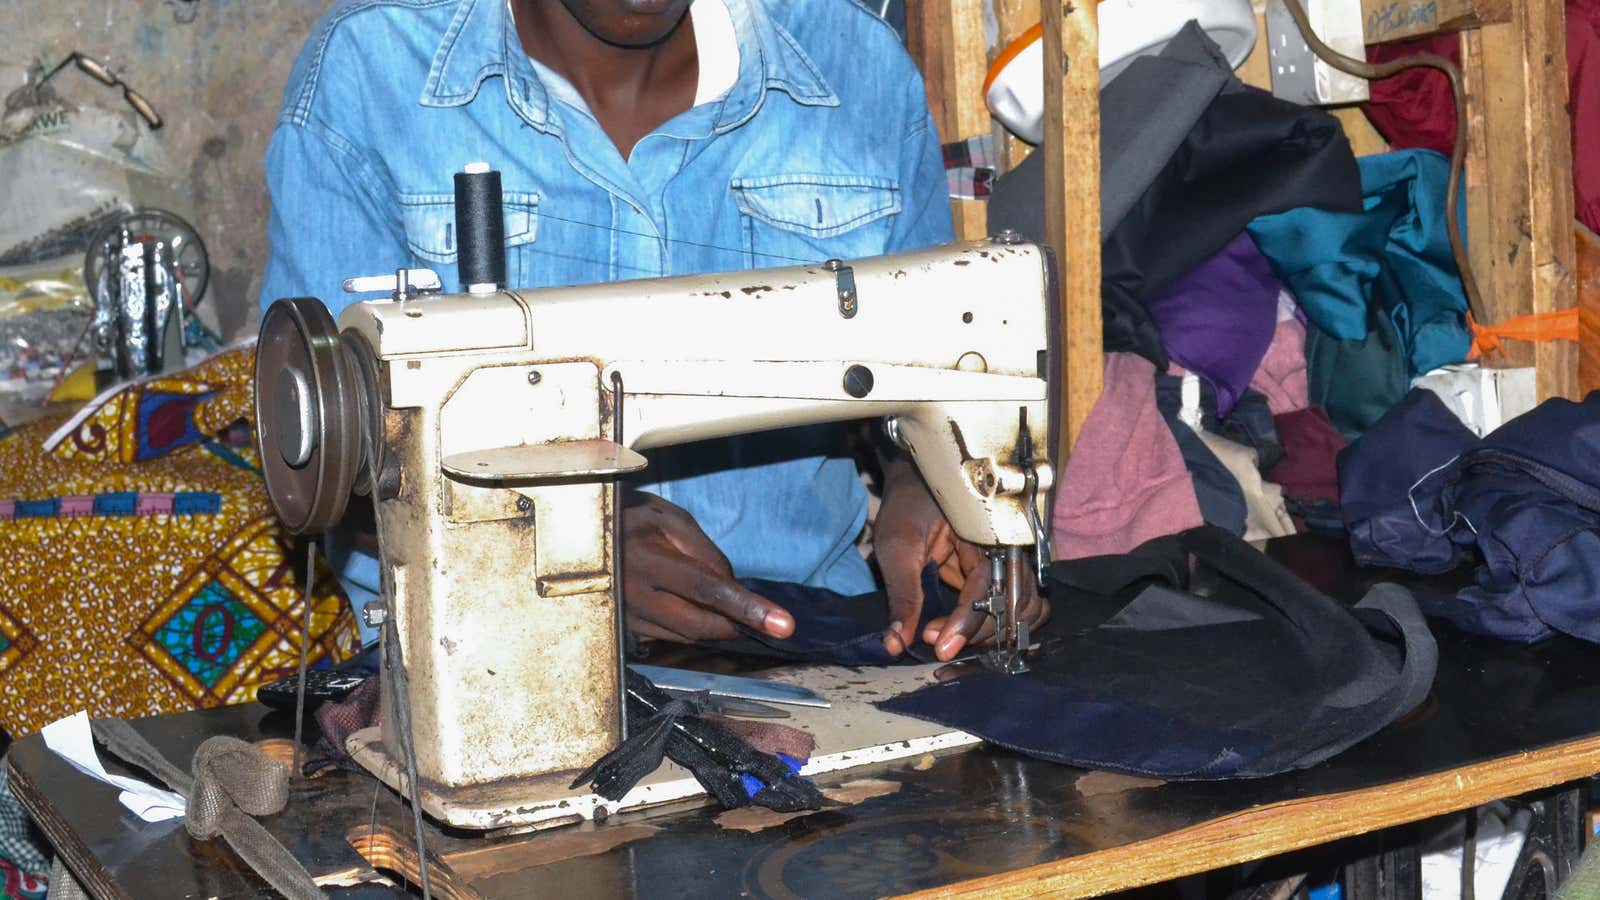 Local businesses in Uganda that rely on imports have been hit hard by tax reforms.